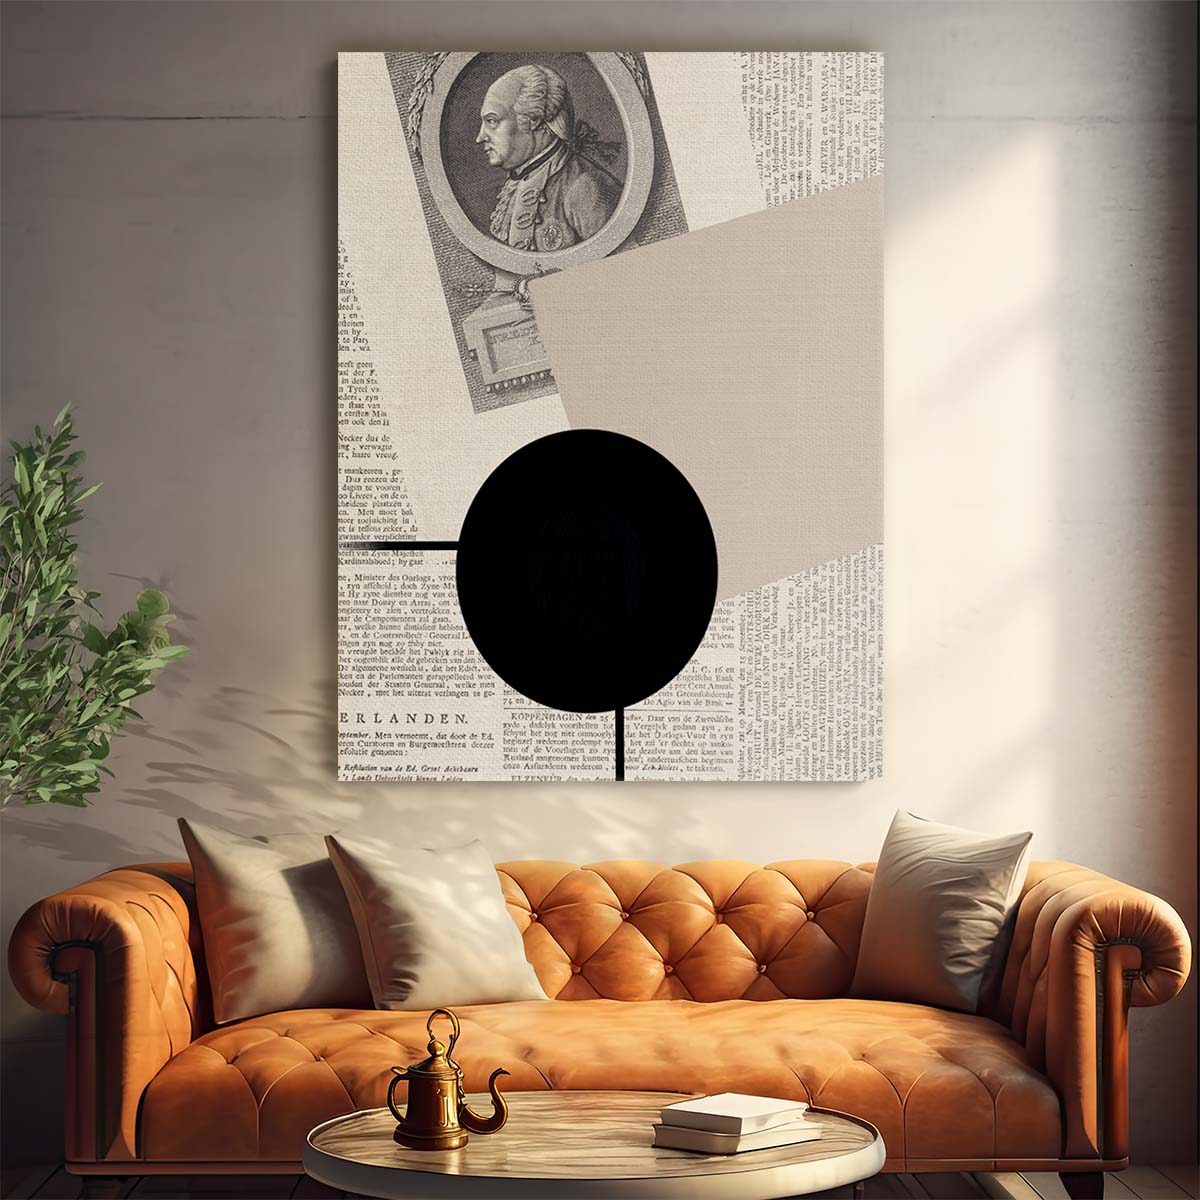 Modern Abstract Collage Illustration Artwork - Vintage Newspaper Style by Luxuriance Designs, made in USA